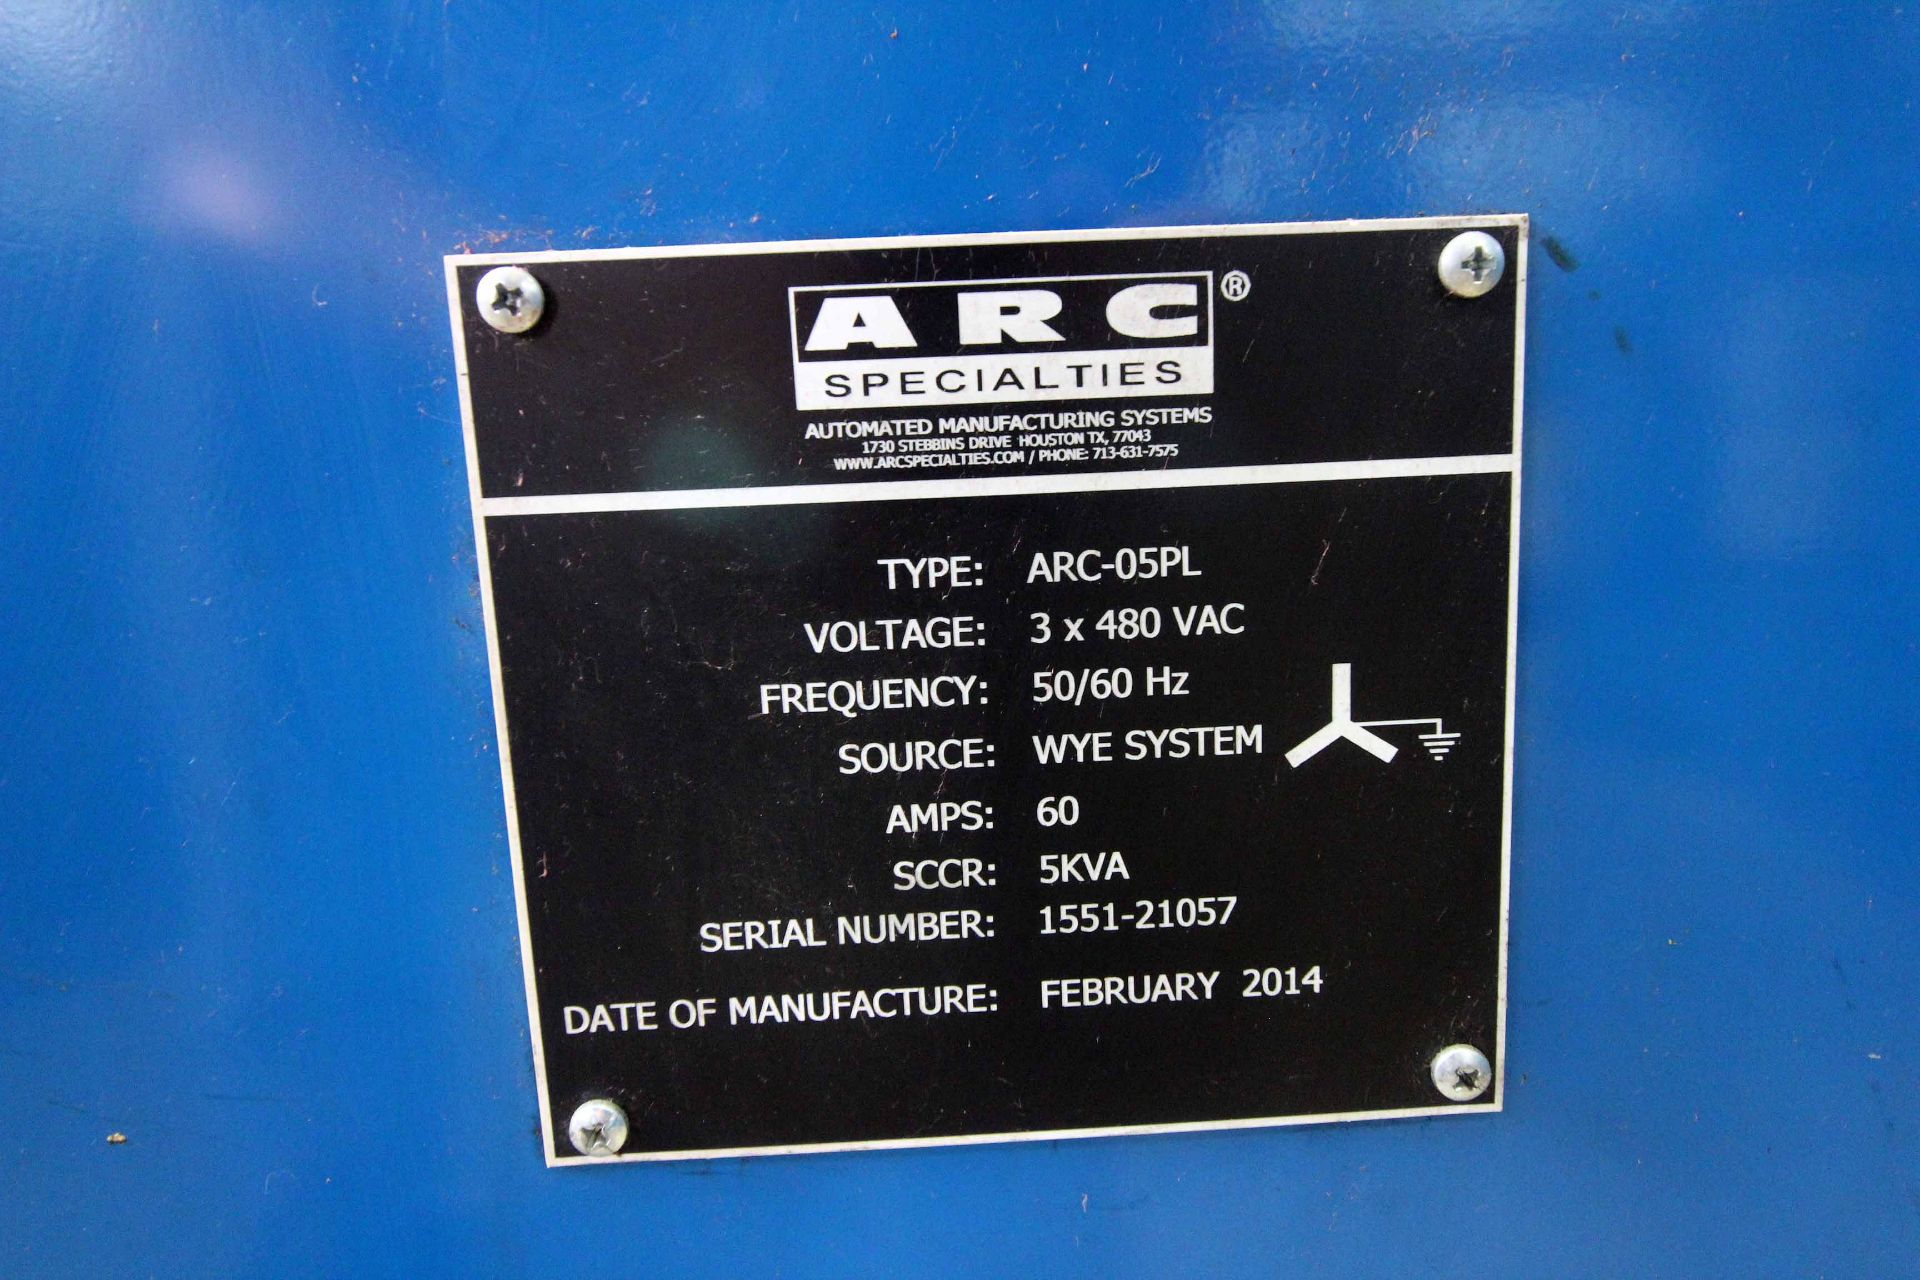 BORE CLADDING SYSTEM, ARC SPECIALTIES MDL. ARC-05PL, new 2014, 5,000 amps, Miller Mdl. XMT450 CC/ - Image 2 of 6